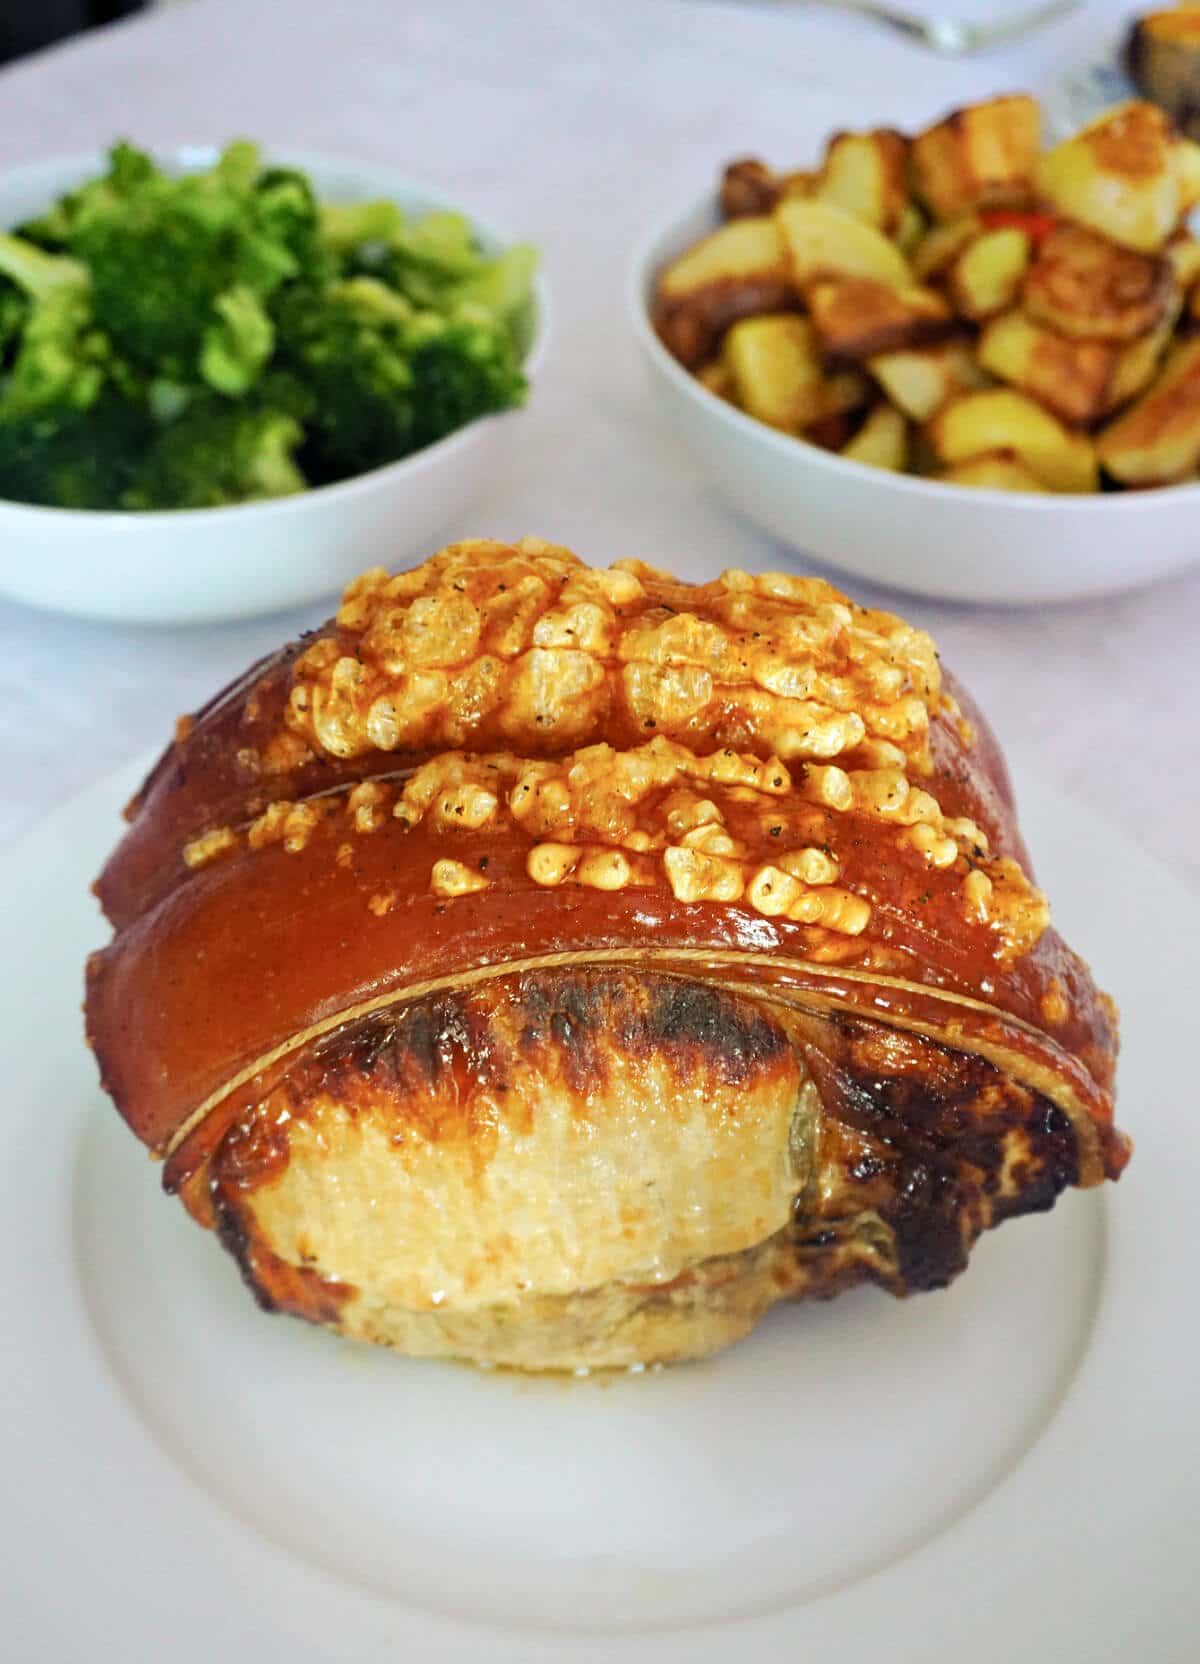 A roast pork joint on a white plate with broccoli and roasties behind.